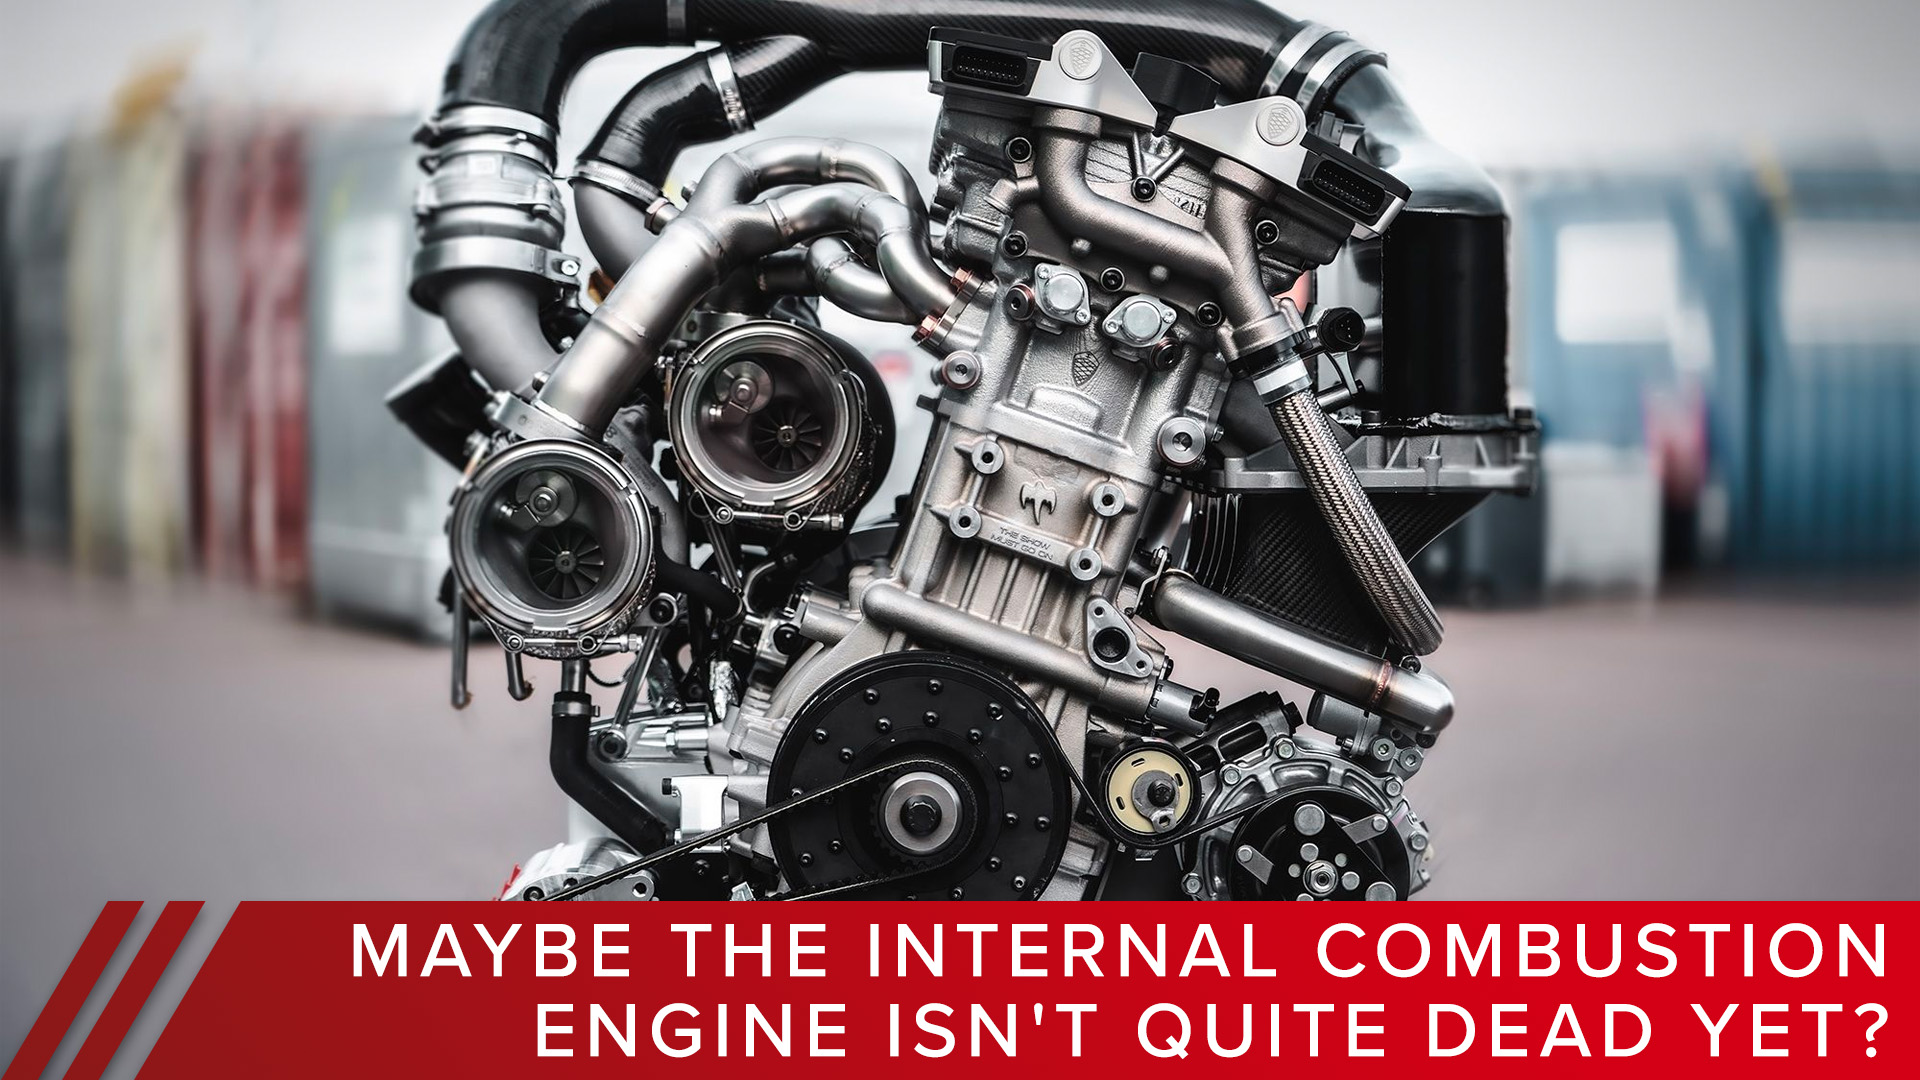 Maybe the Internal Combustion Engine isn't quite dead yet?